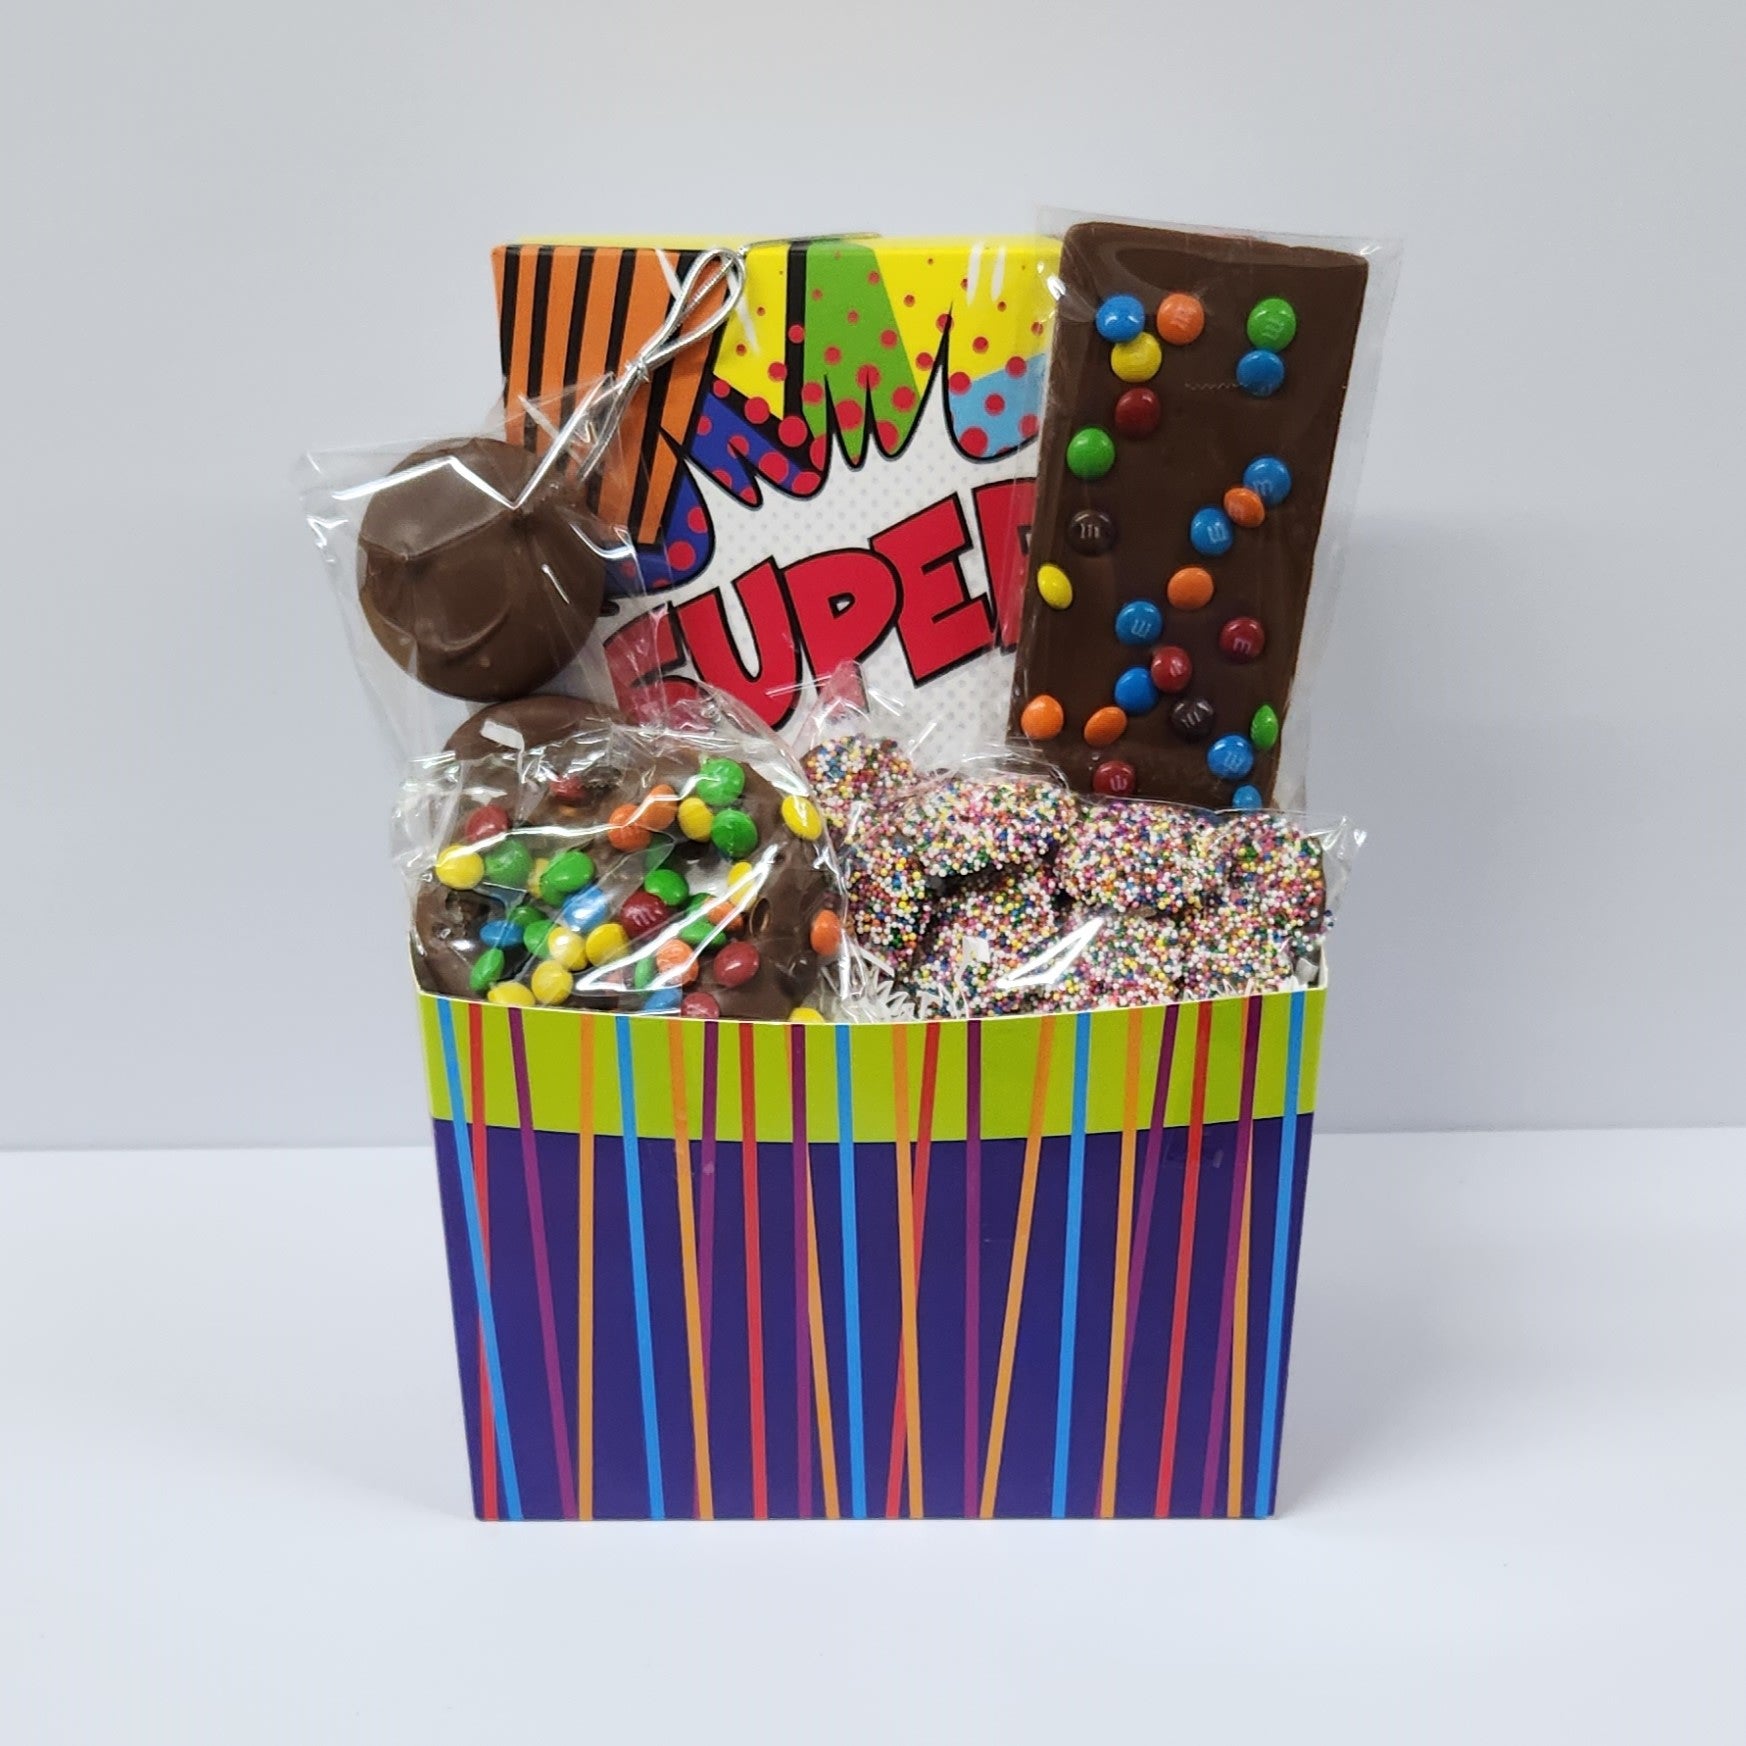 The Super Gift Basket includes Milk Chocolate covered Oreos, Nonpareils, an M & M Pretzel, Milk Chocolate Fun Bar with mini M&M's and 16-piece assortment of creams, caramels, meltaways and truffles